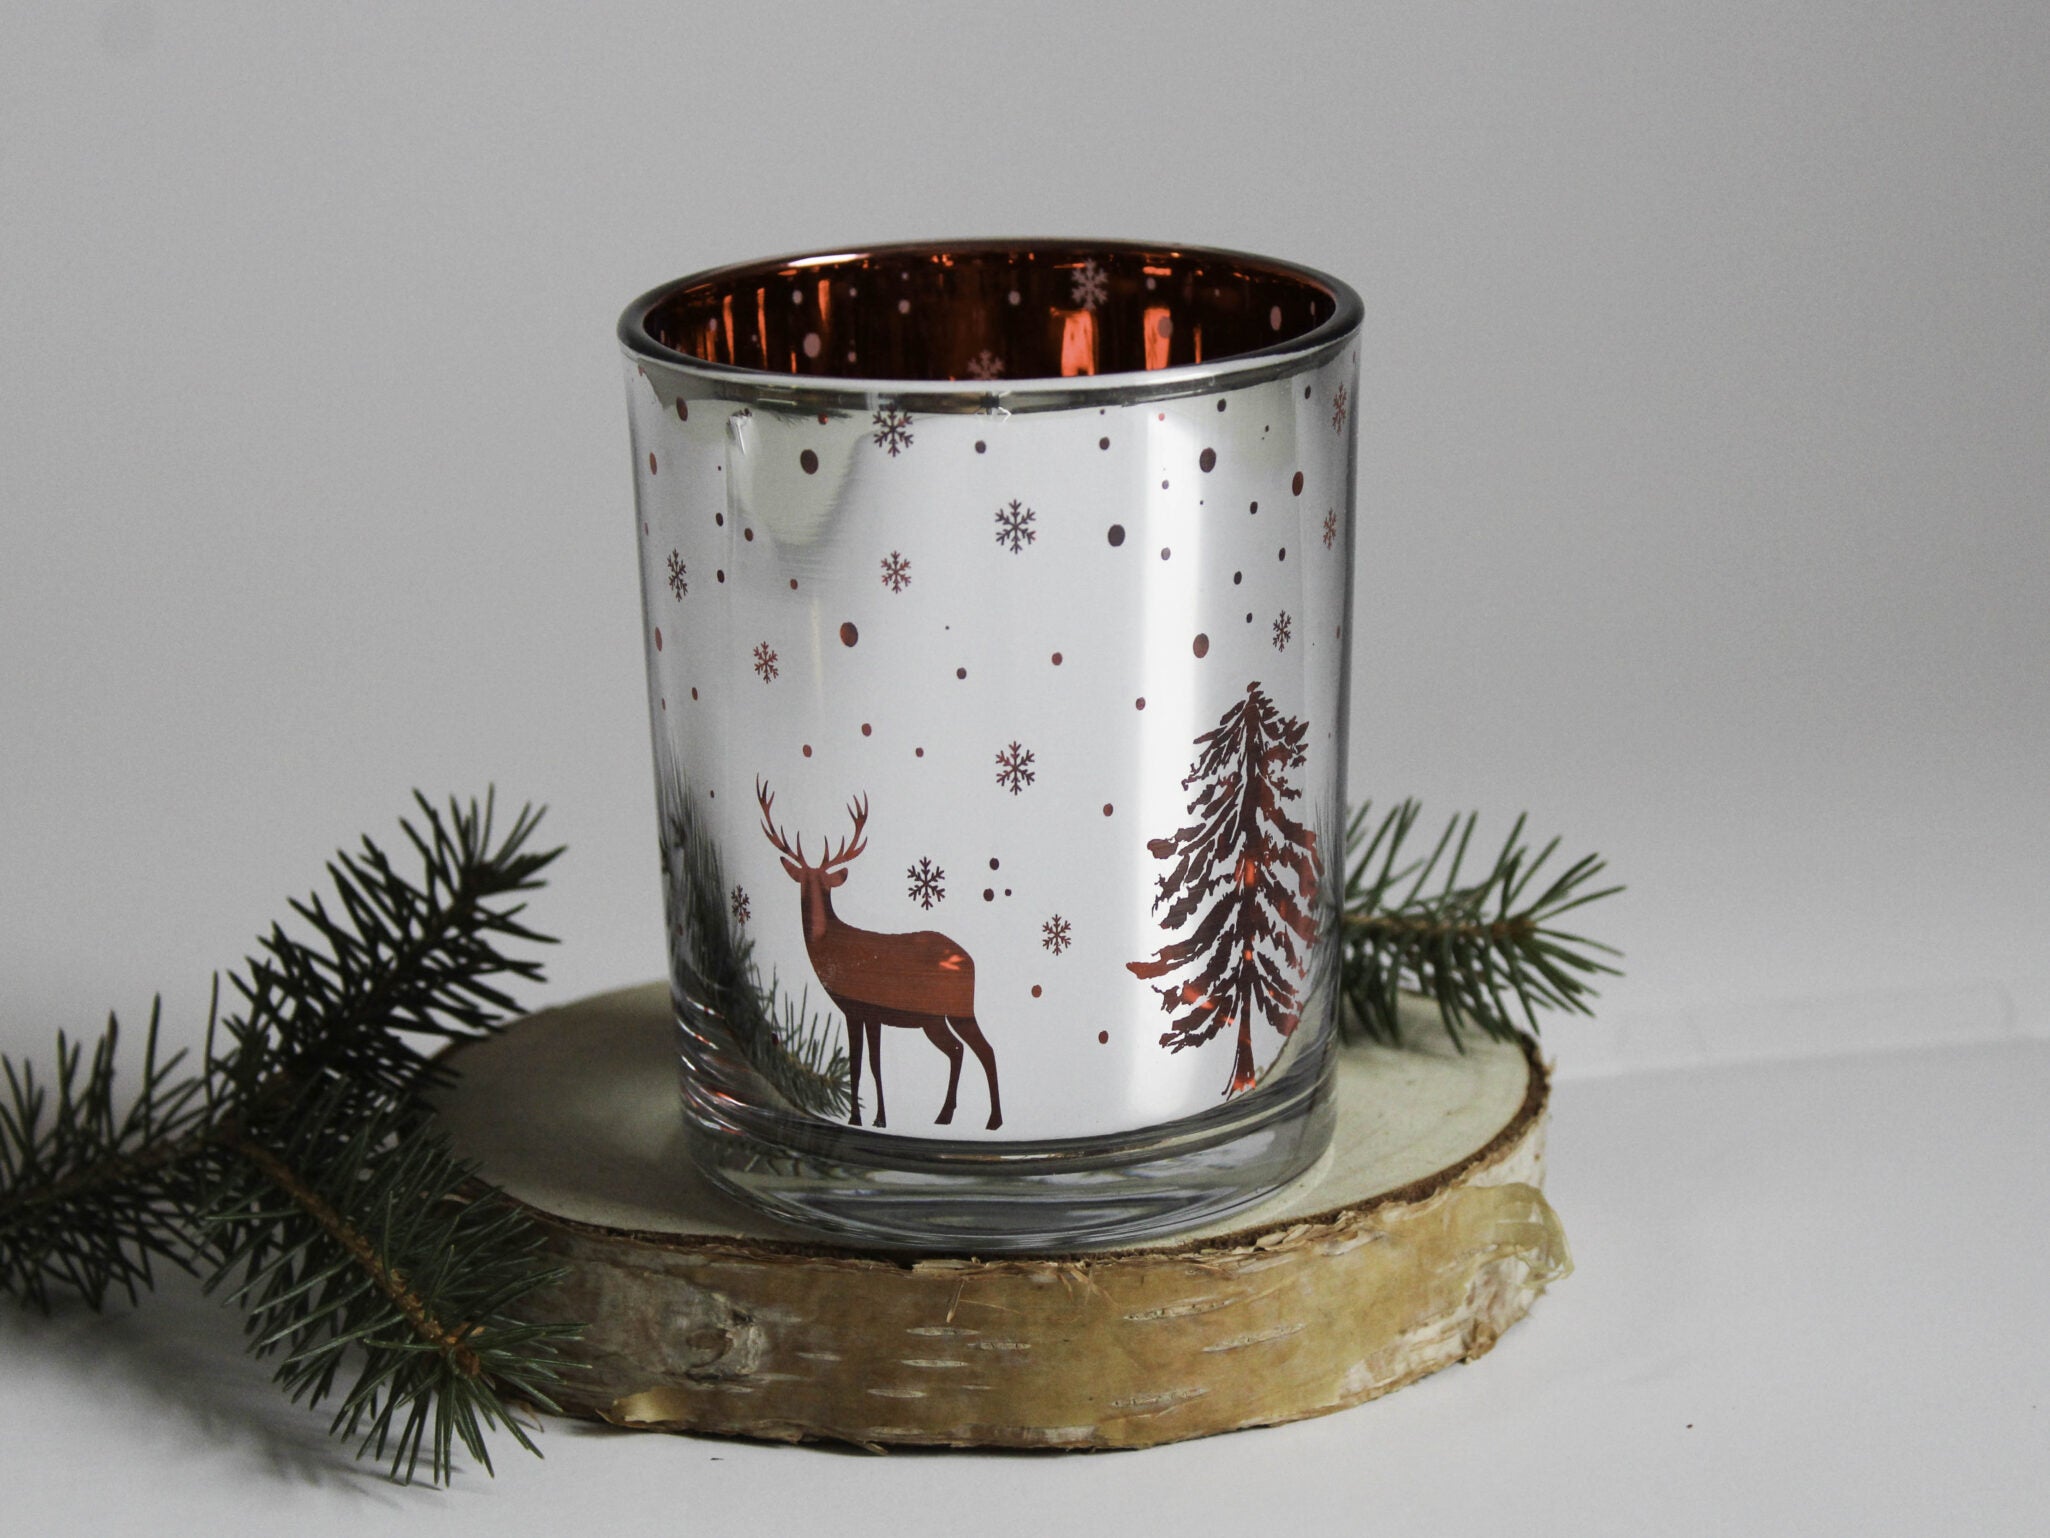 Votive Candle Holder - Small